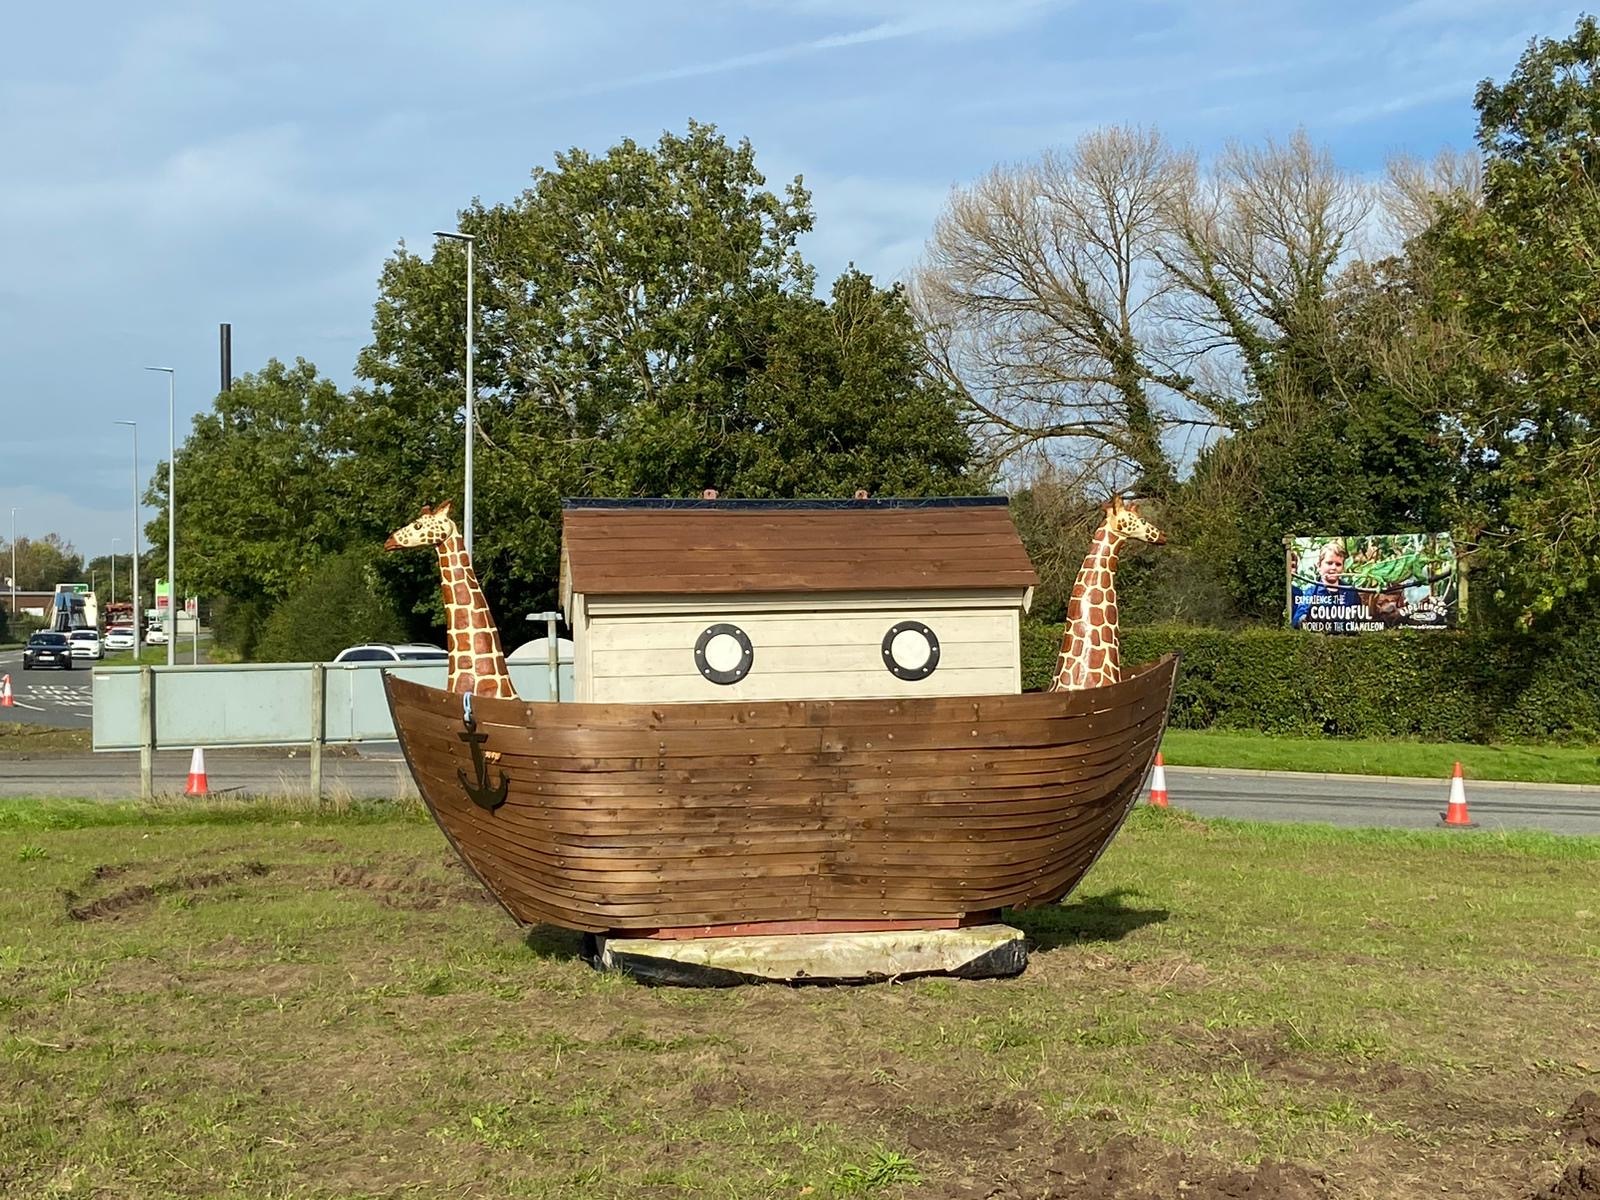 The Noahs Ark has returned to the roundabout outside Chester Zoo following its renovation.